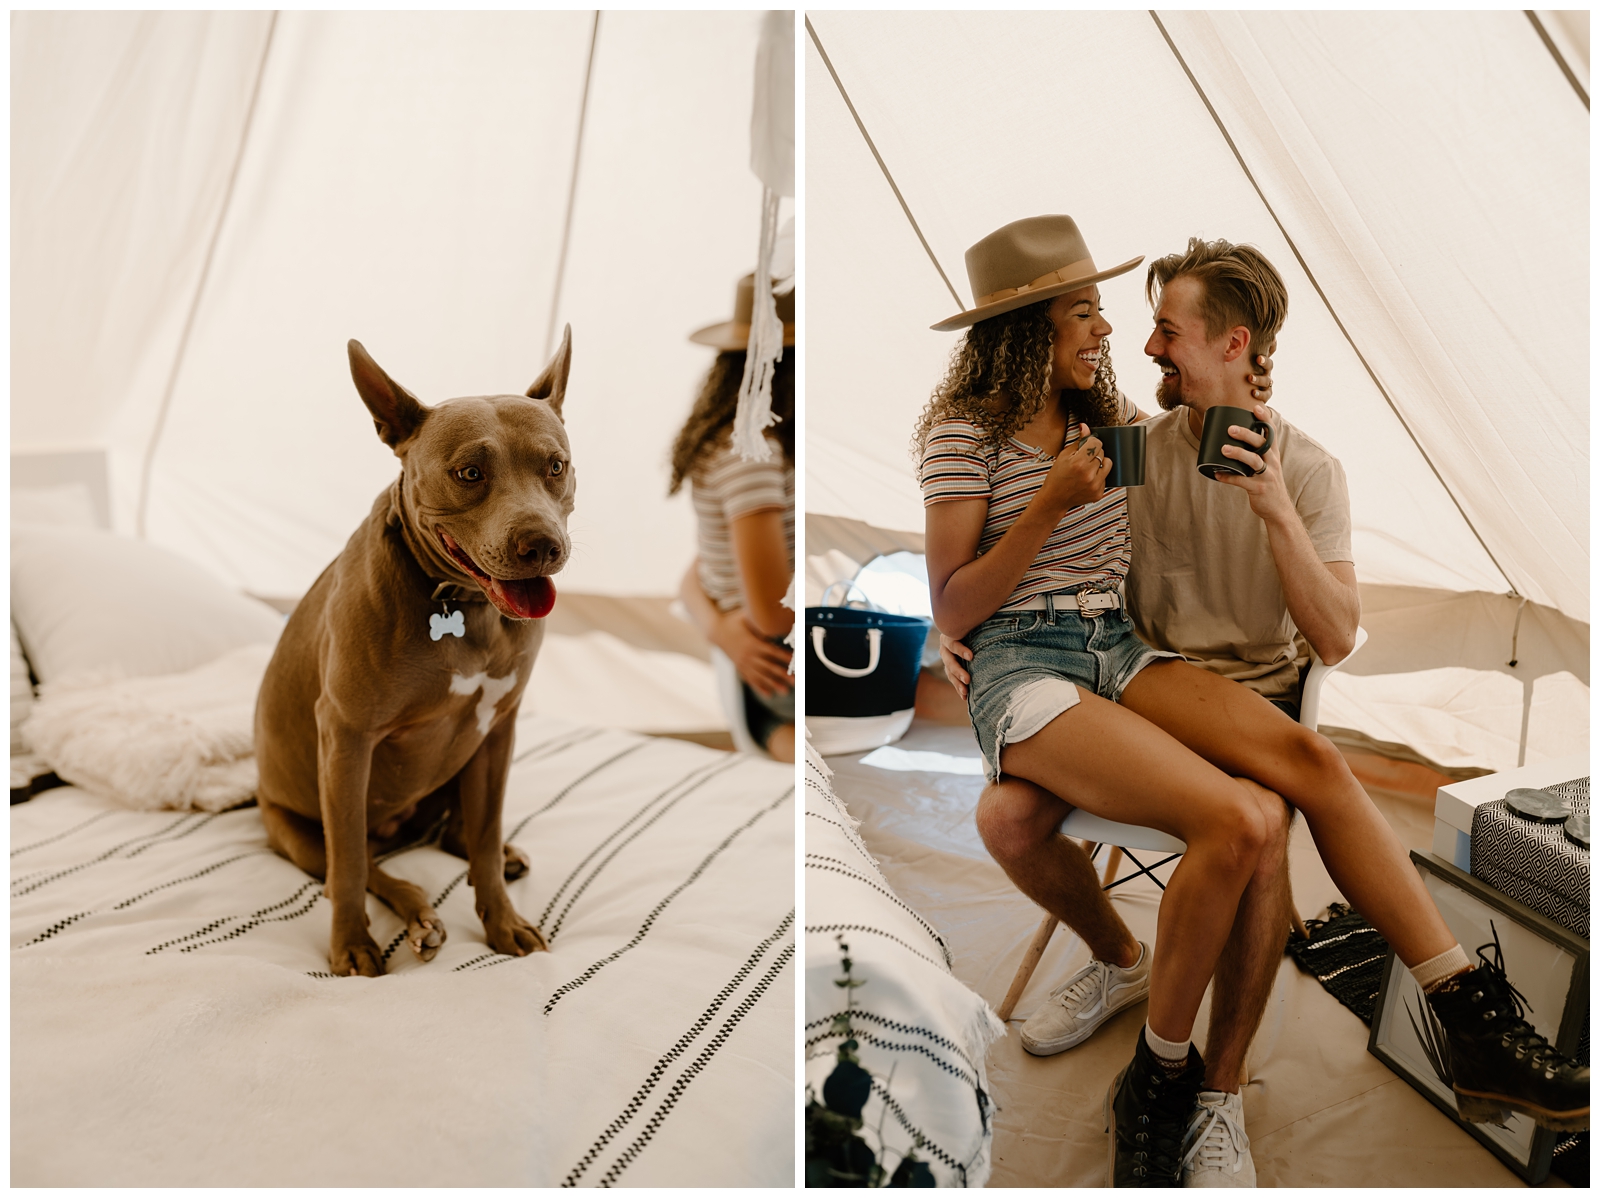 Glamping engagement session in Joshua Tree, CA by adventurous photographer